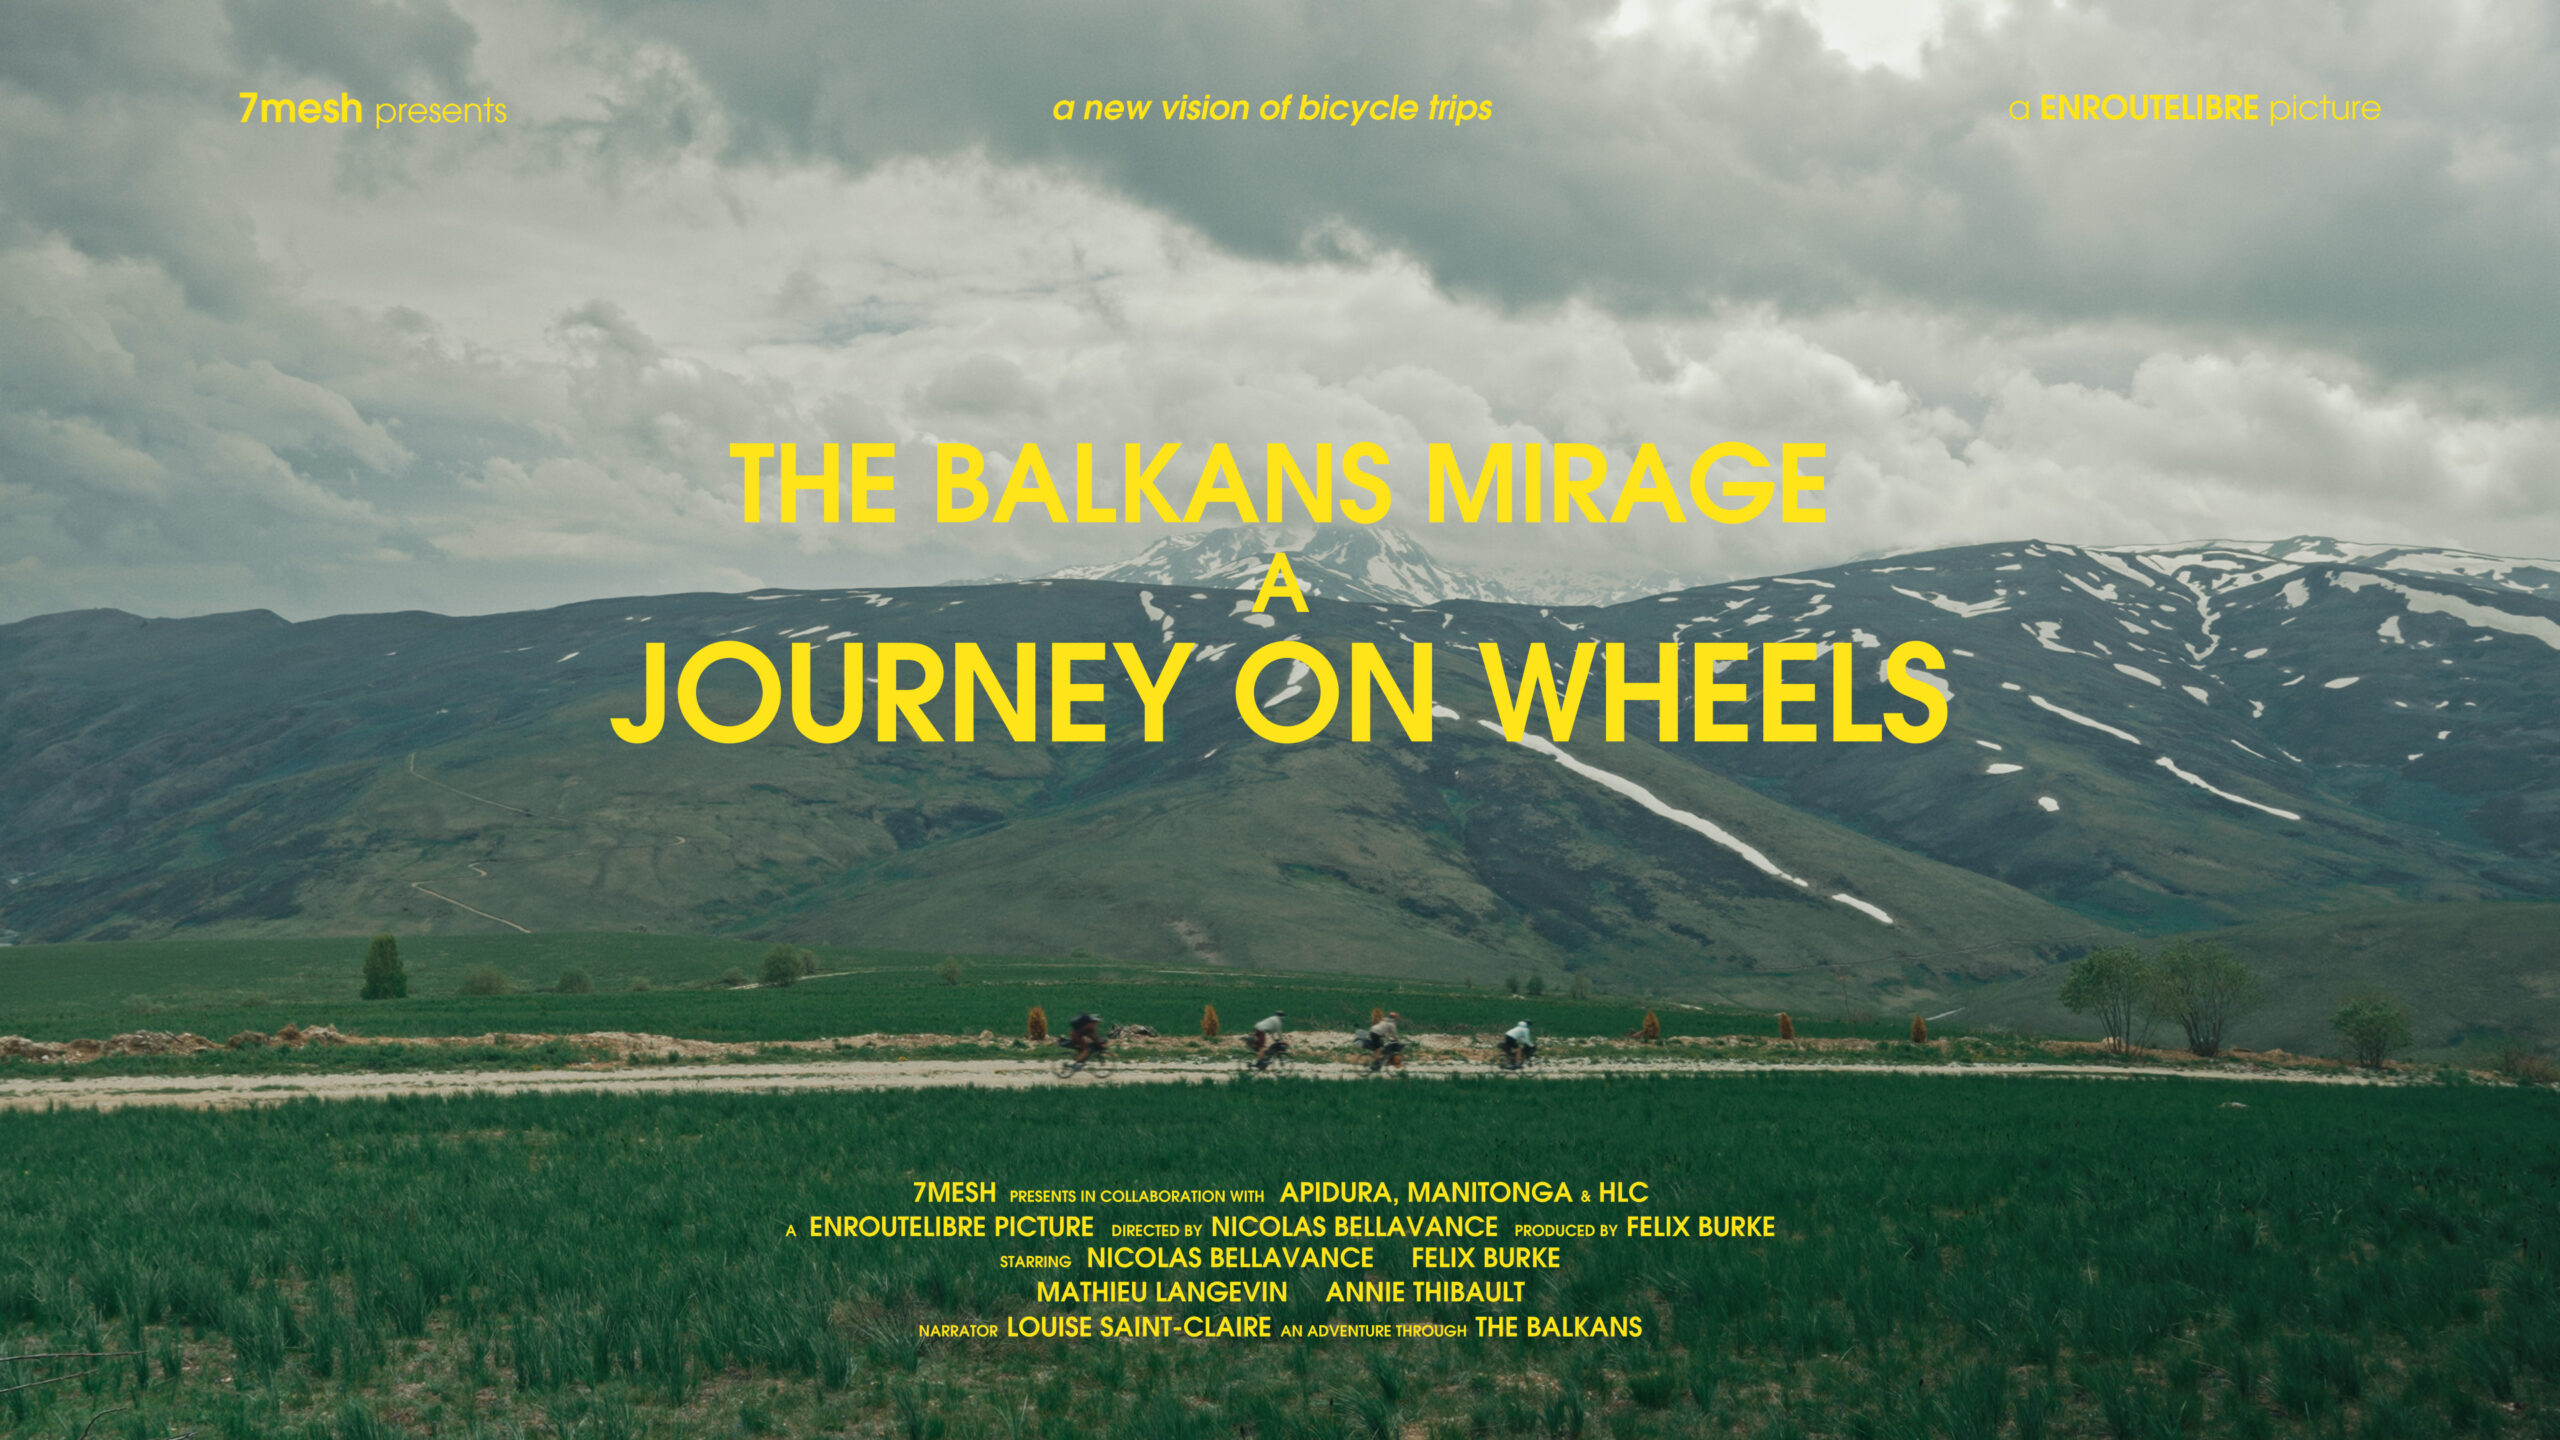 The Balkans Mirage: A Journey on Wheels